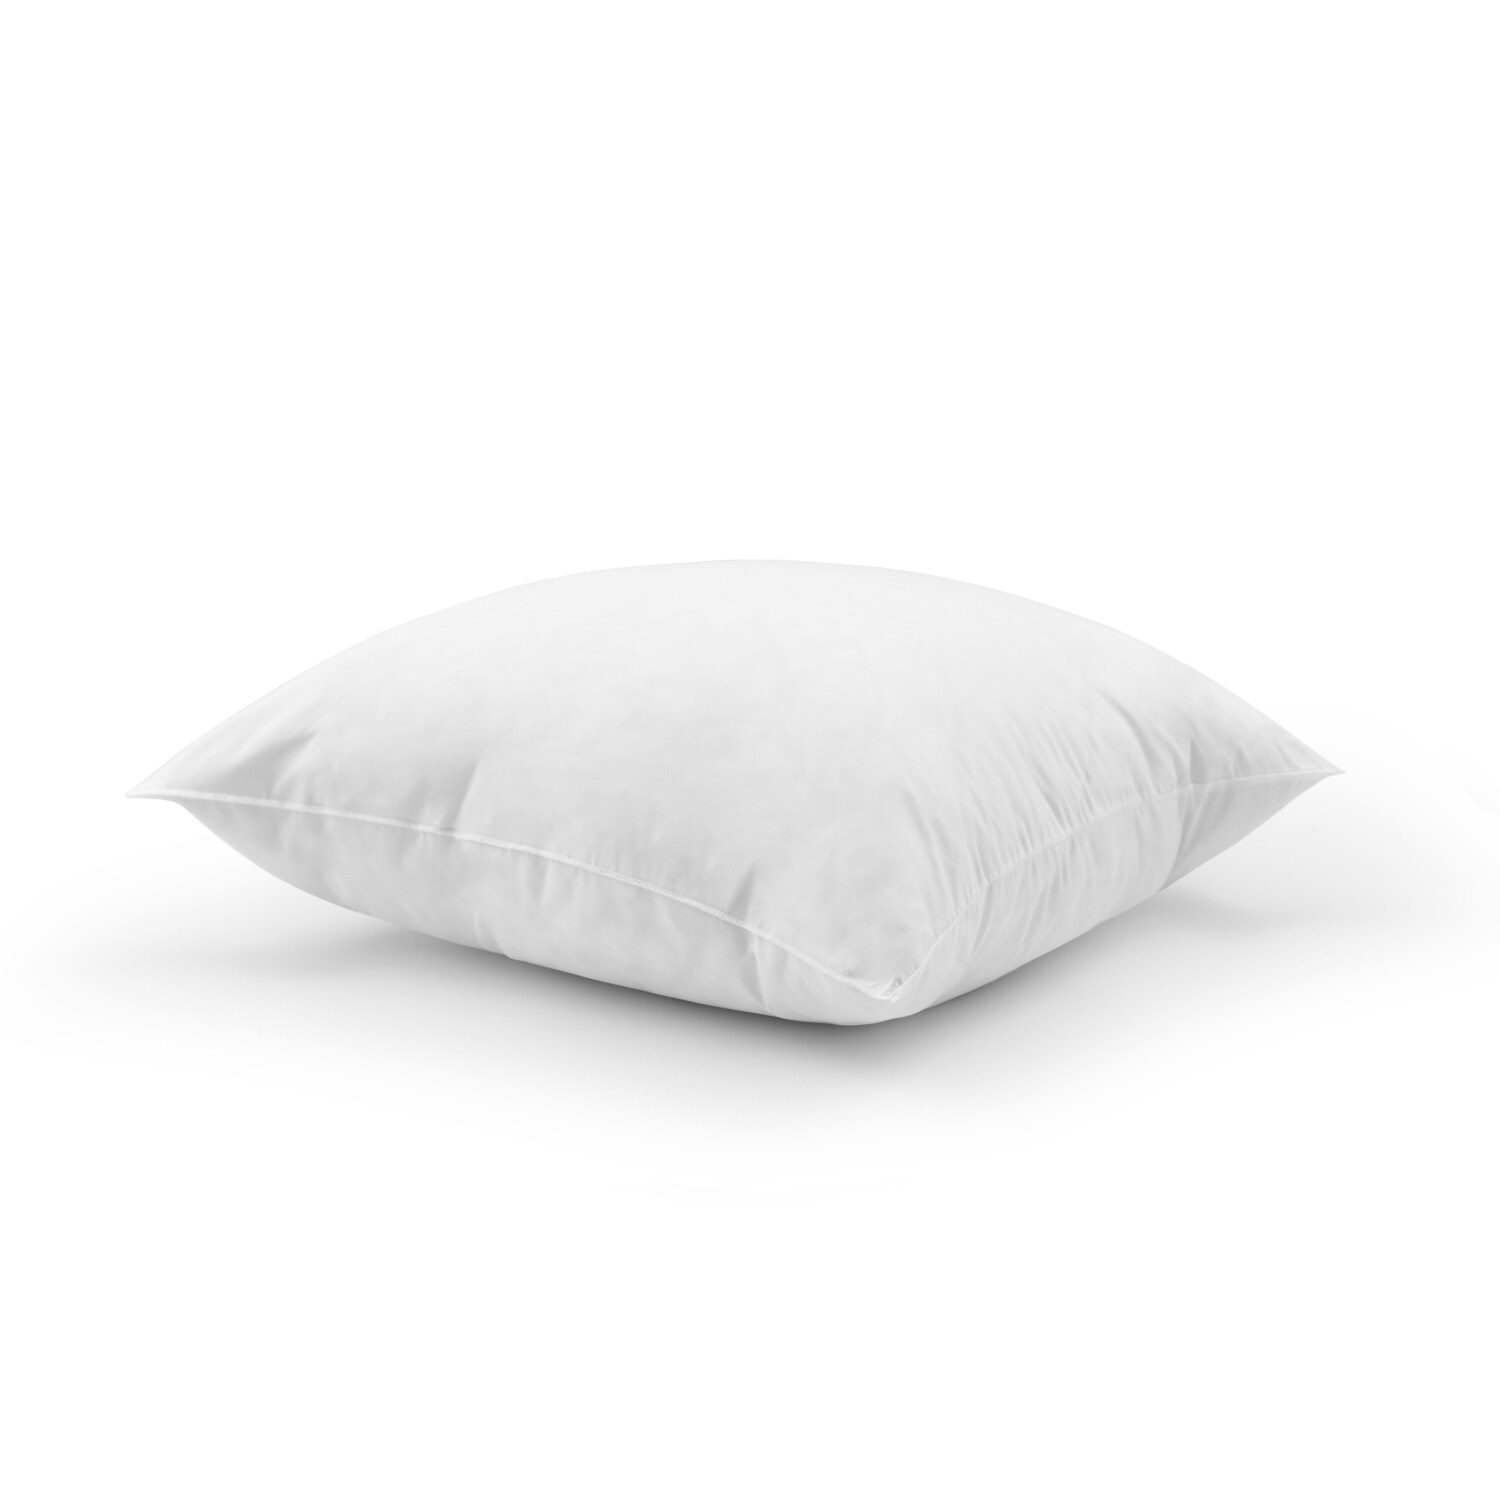 https://ak1.ostkcdn.com/images/products/is/images/direct/654fda6feb81ef58c530b17c3d573da8230a52b6/Iso-Pedic-2-Pack-Square-Euro-Pillows-24x24-Inch.jpg